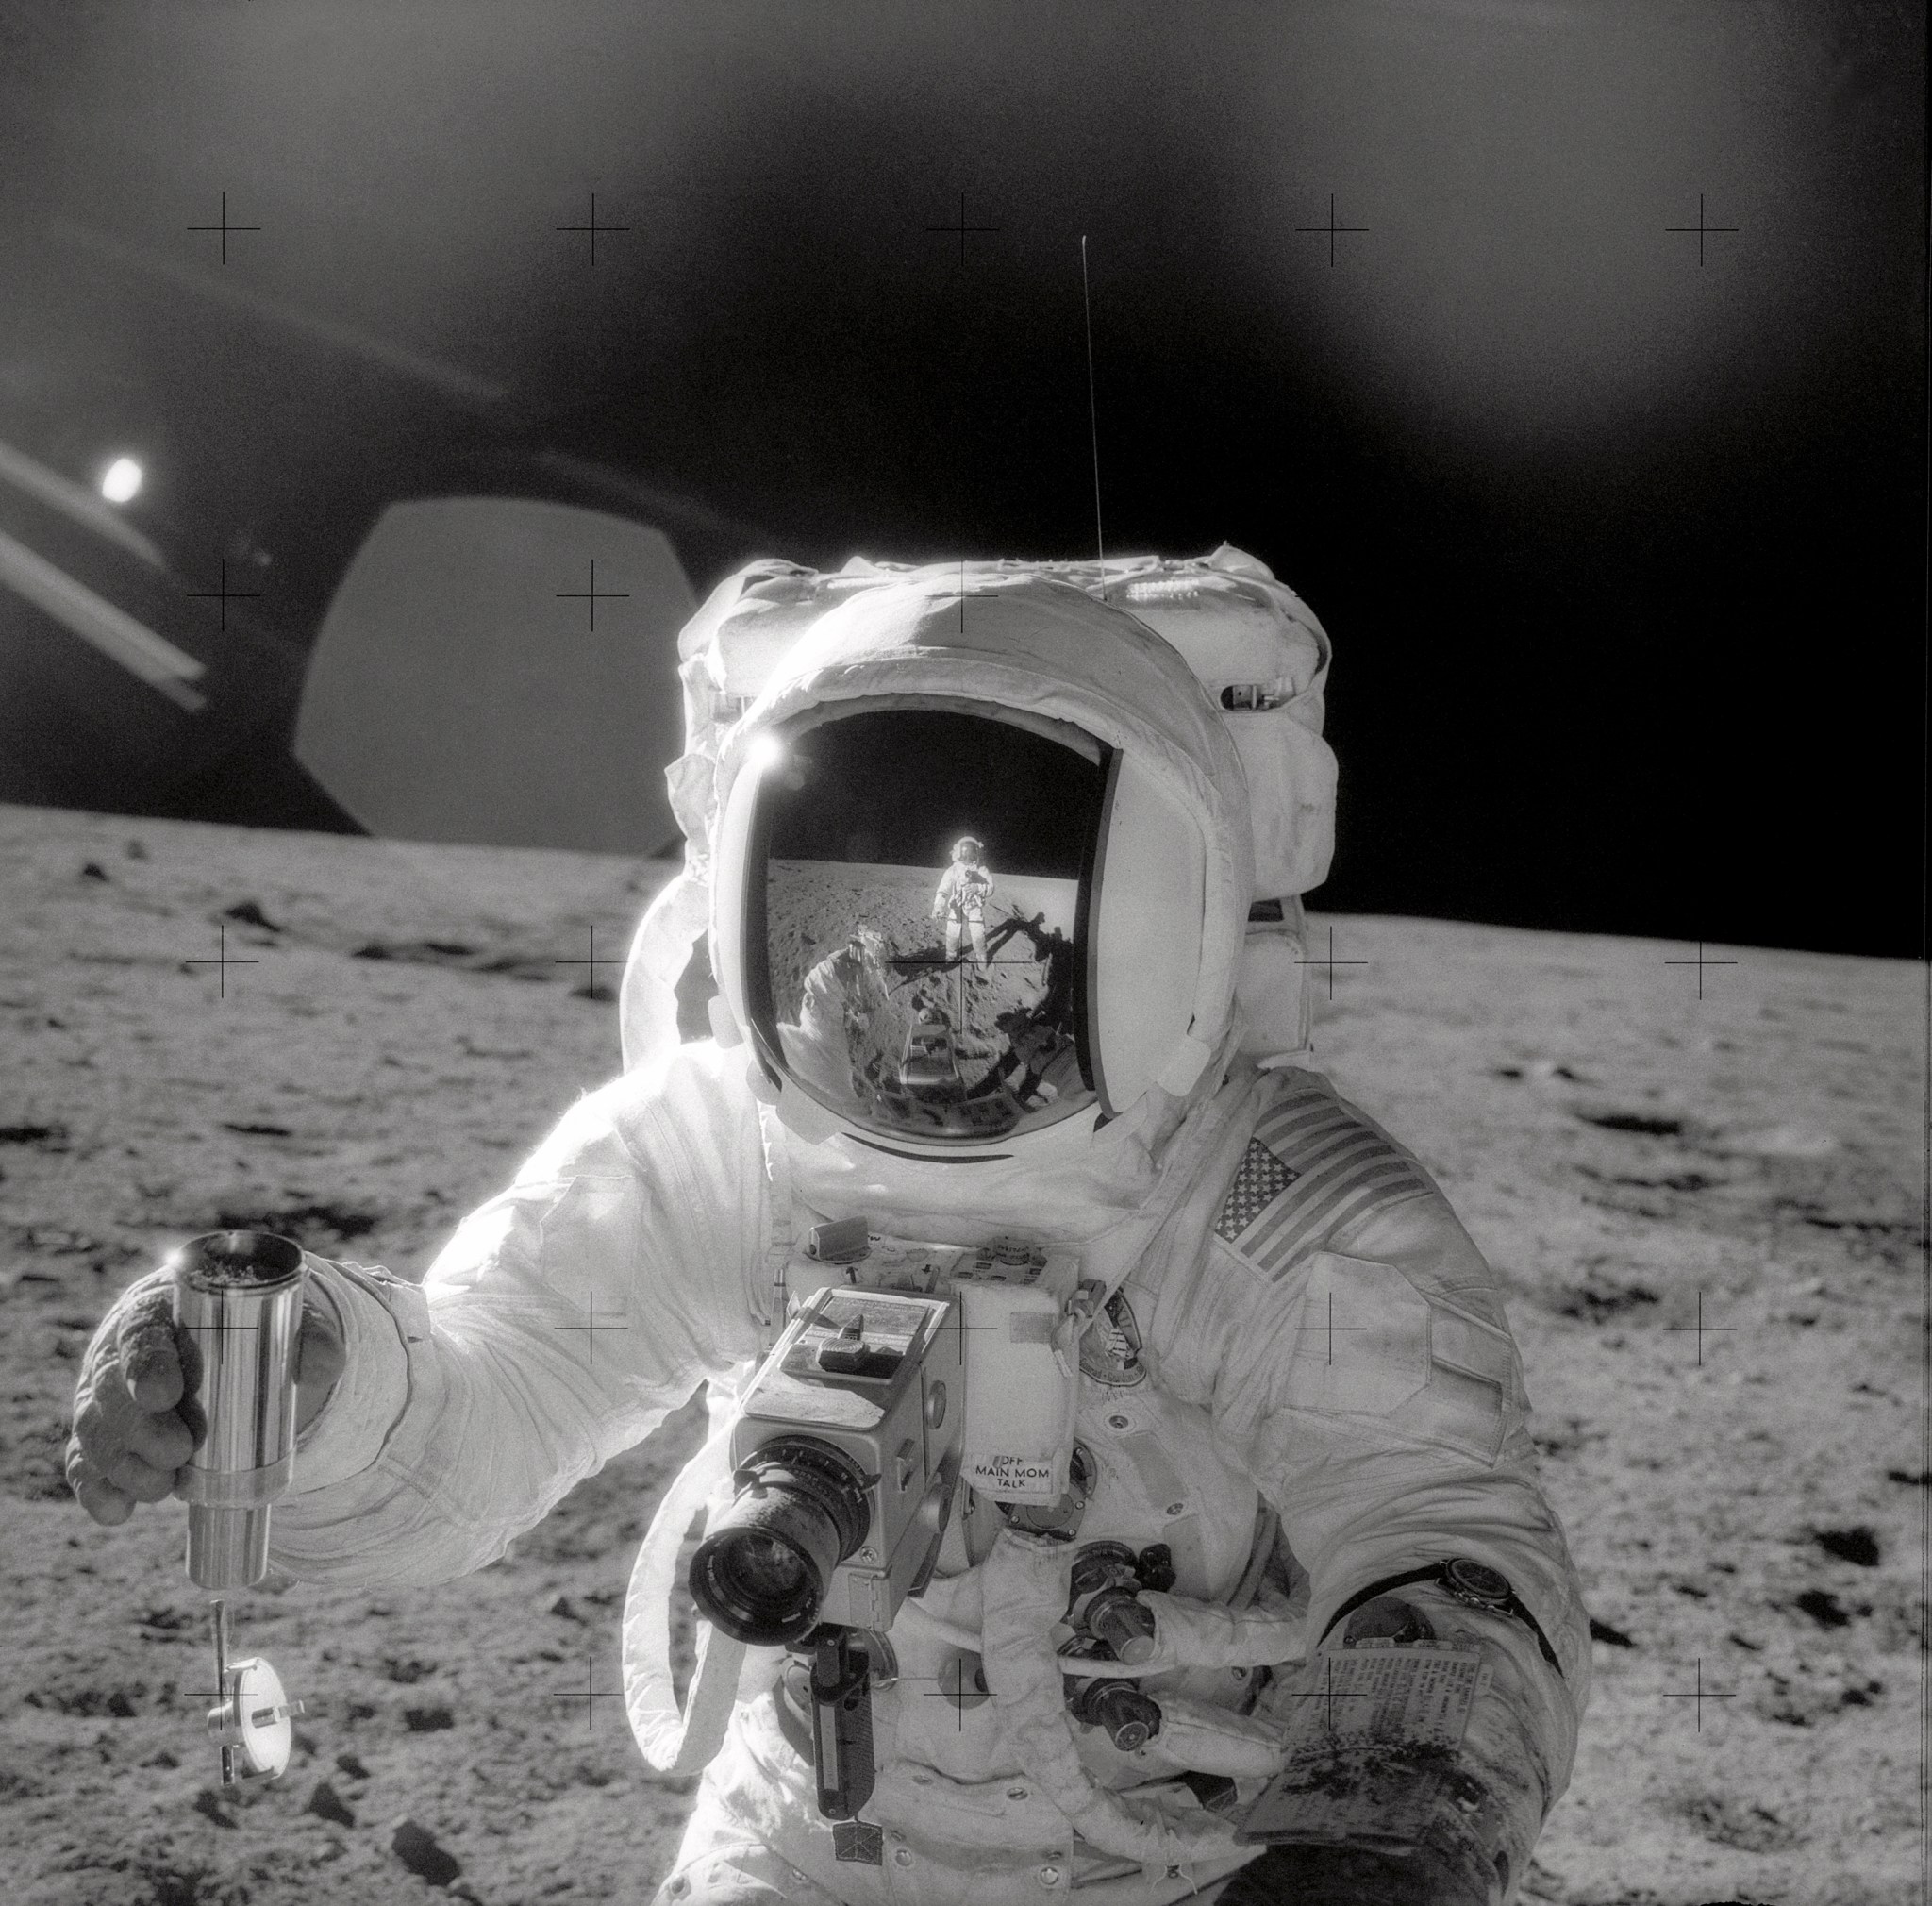 Apollo astronaut taking a sample of the lunar surface